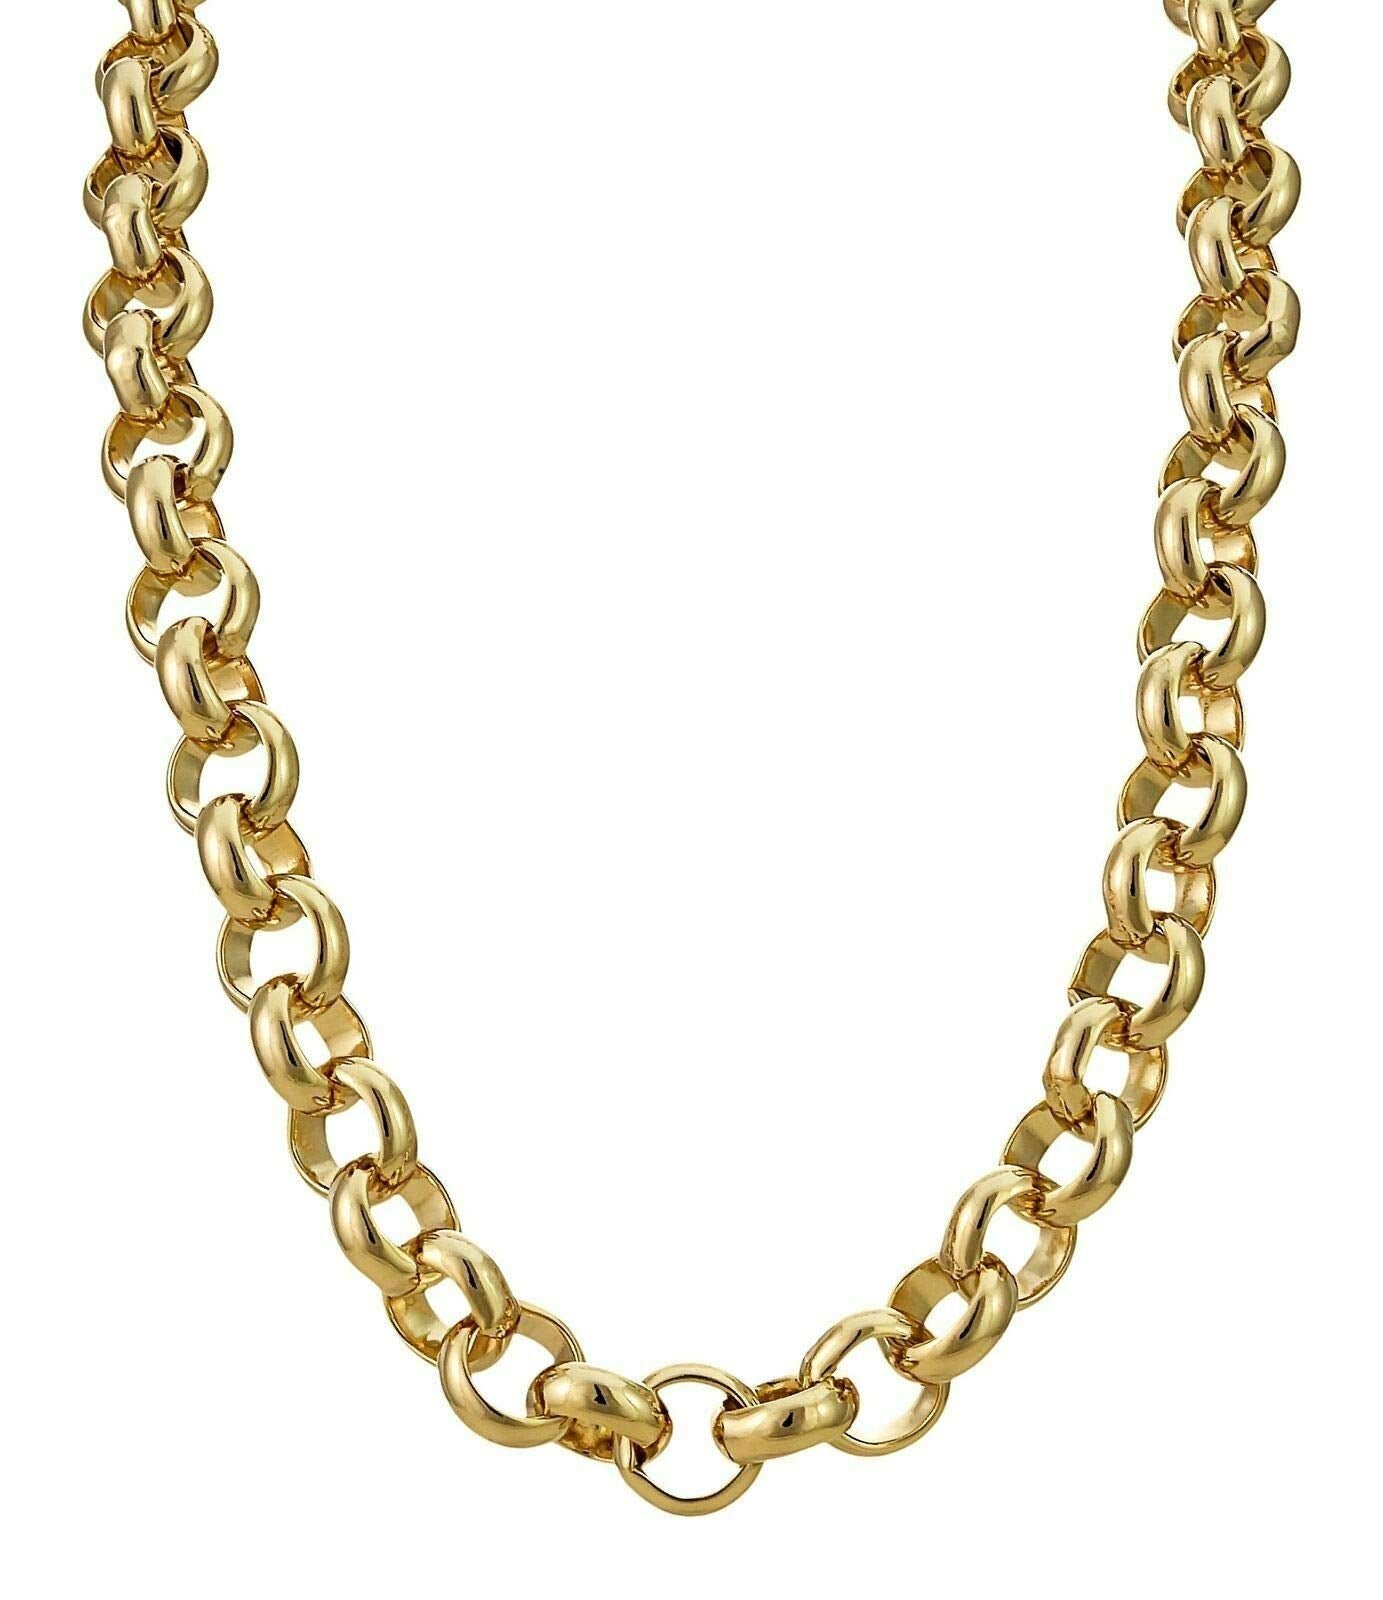 THE BLING KING 10mm Gold Belcher Chain Necklace, Luxury Finish and Detailing 18K Real Gold Plated Jewellery, Chunky, and Heavy XXL Gold Necklace for Men and Teens (Length: 24 Inches, Weight: 72 grams)